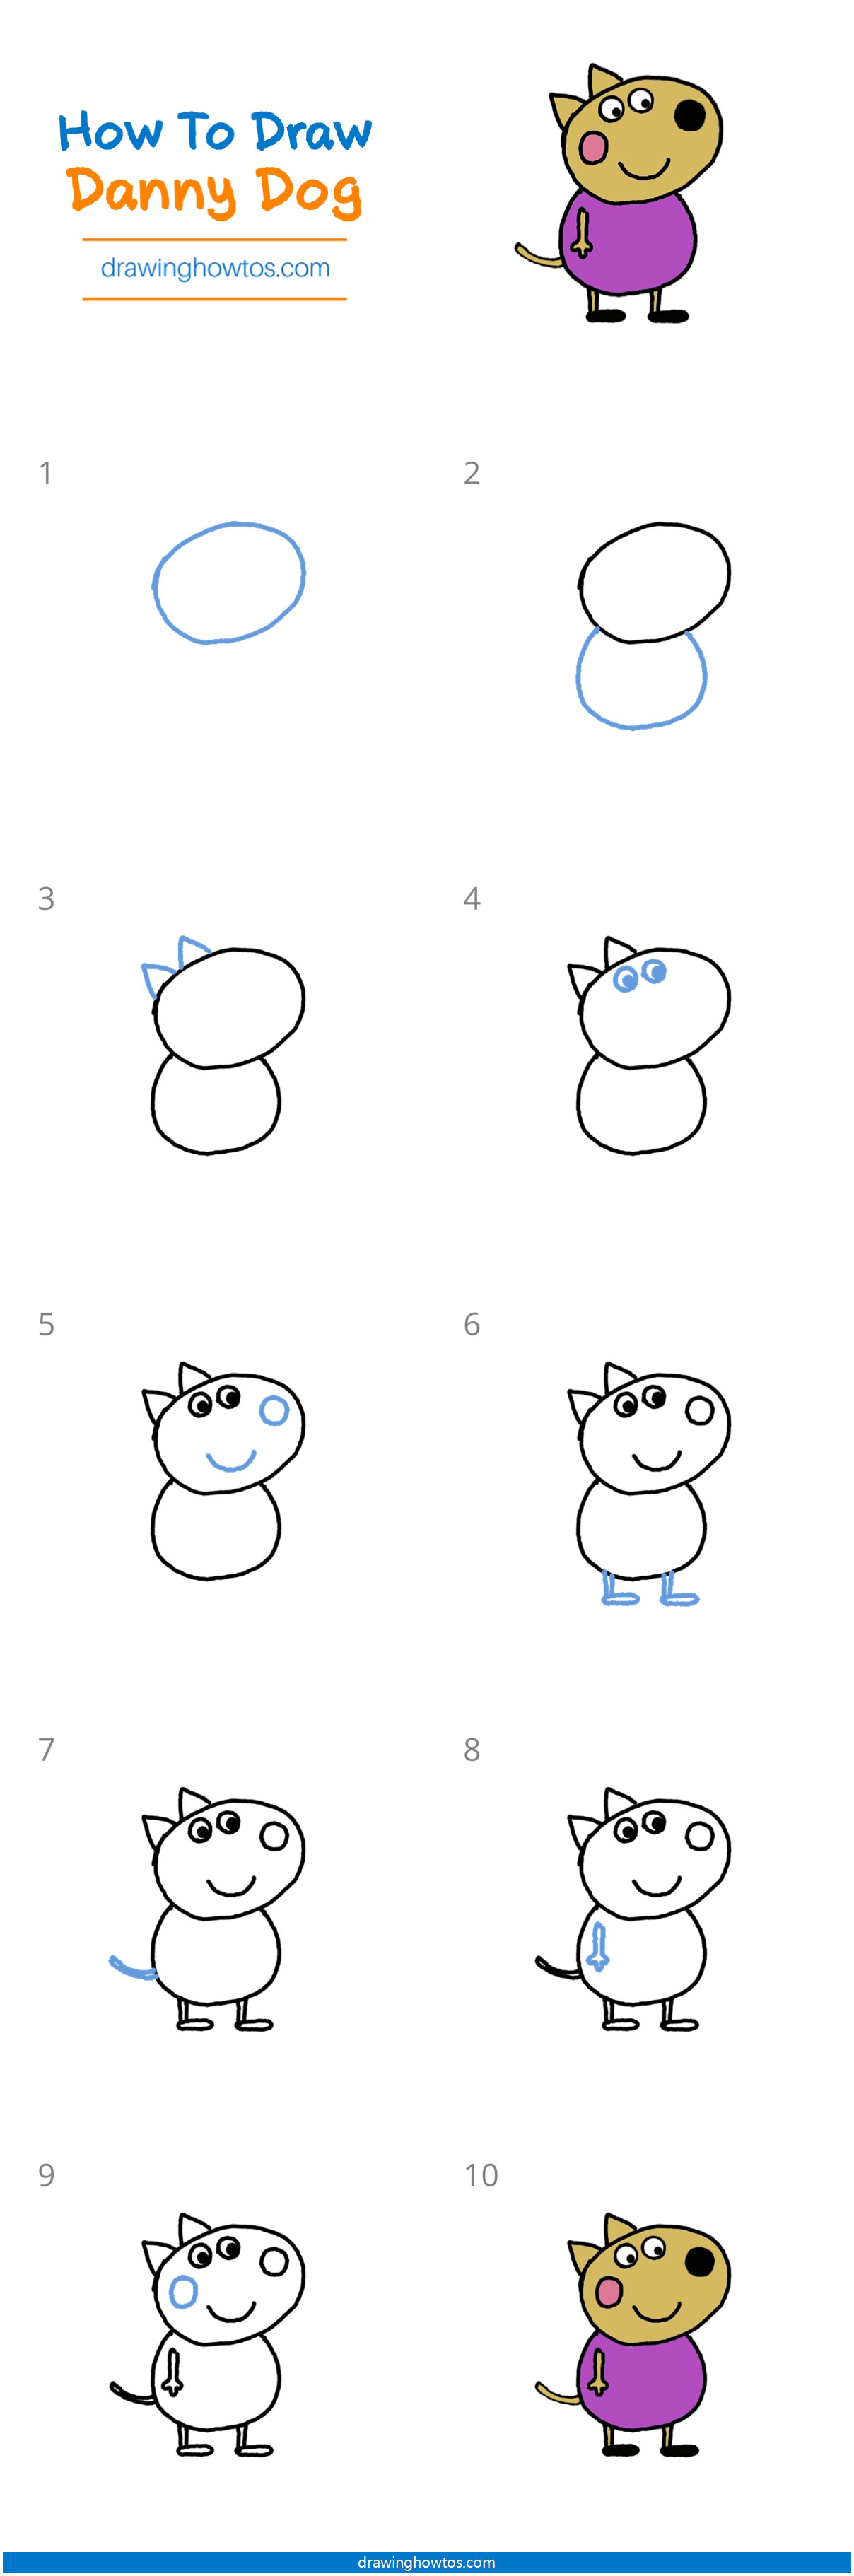 How To Draw Danny Dog From Peppa Pig Step by Step